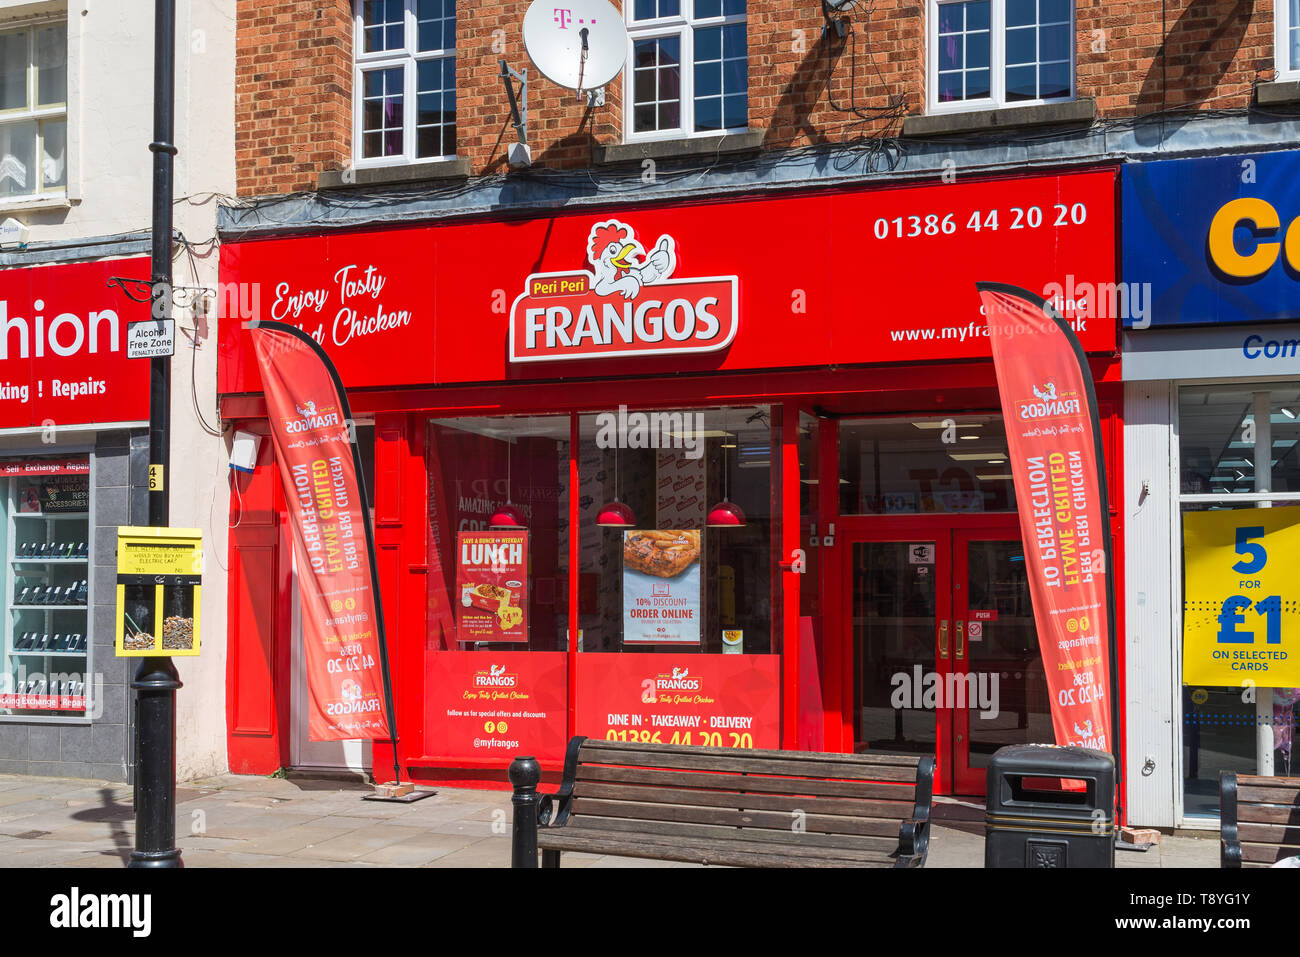 Frangos Peri Peri fried chicken fast food outlet in Evesham ...